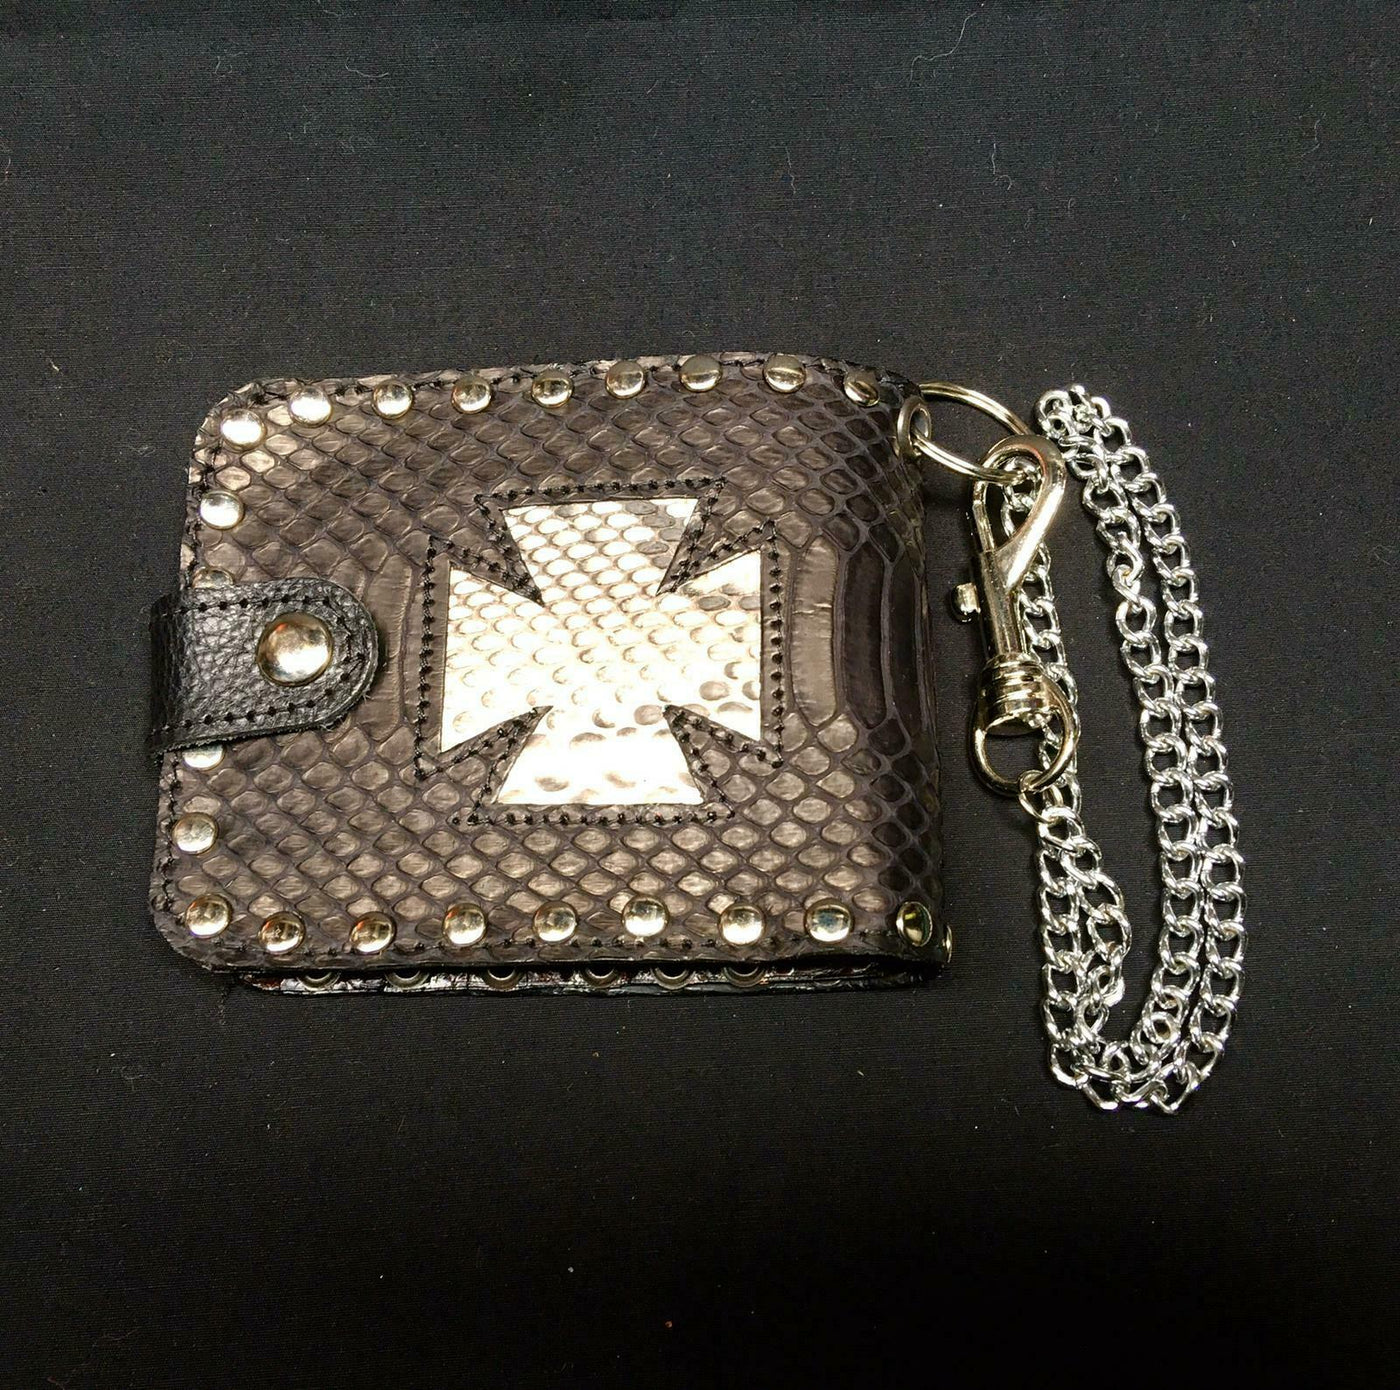 Iron Cross Genuine Python and Sea Snake Skin Leather Wallet